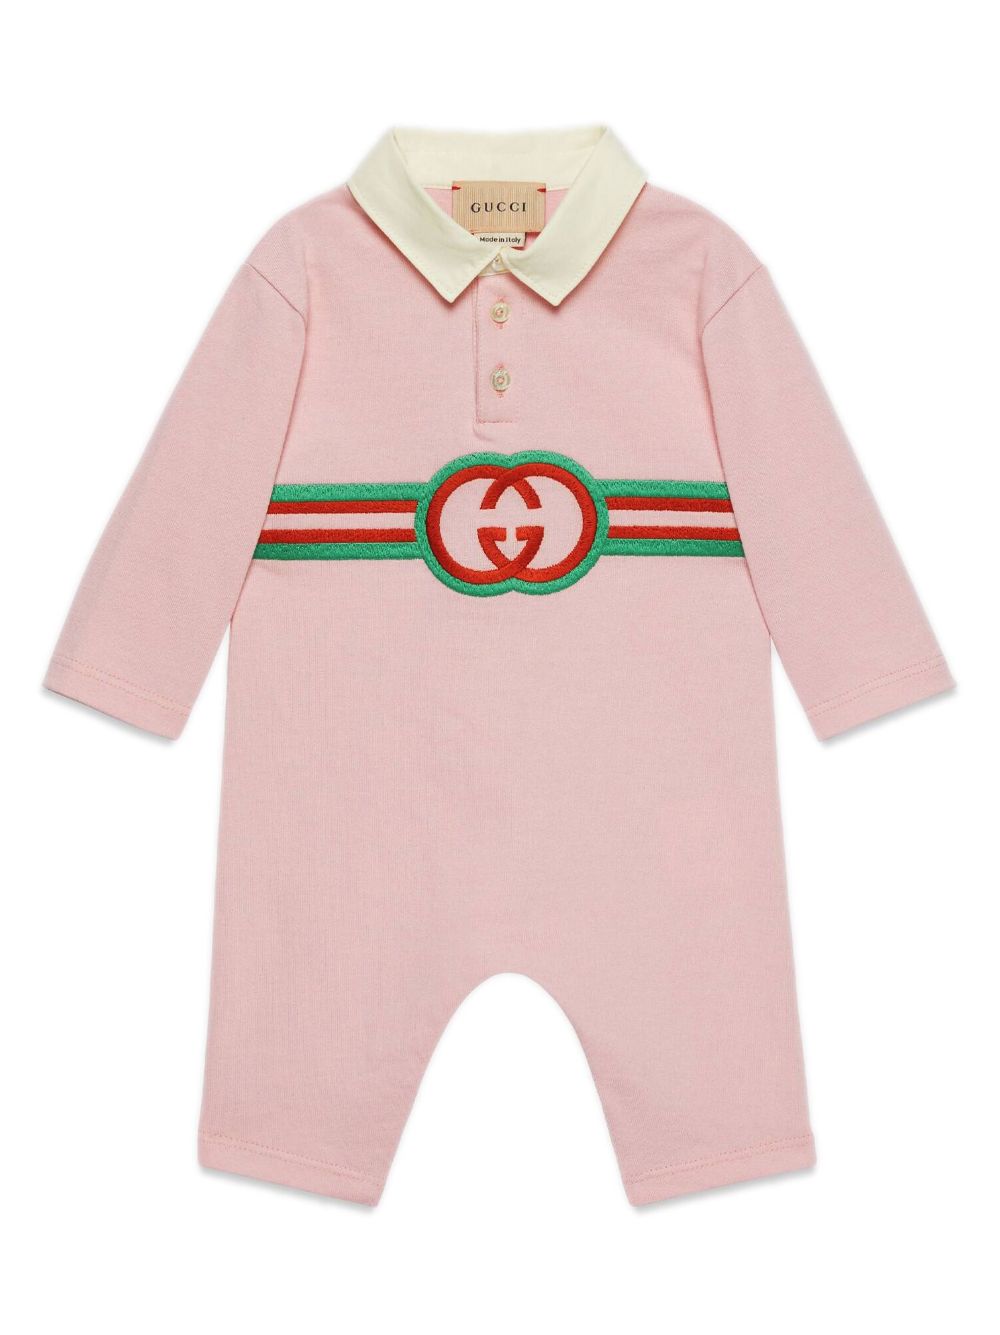 Pink baby girl onesie with logo